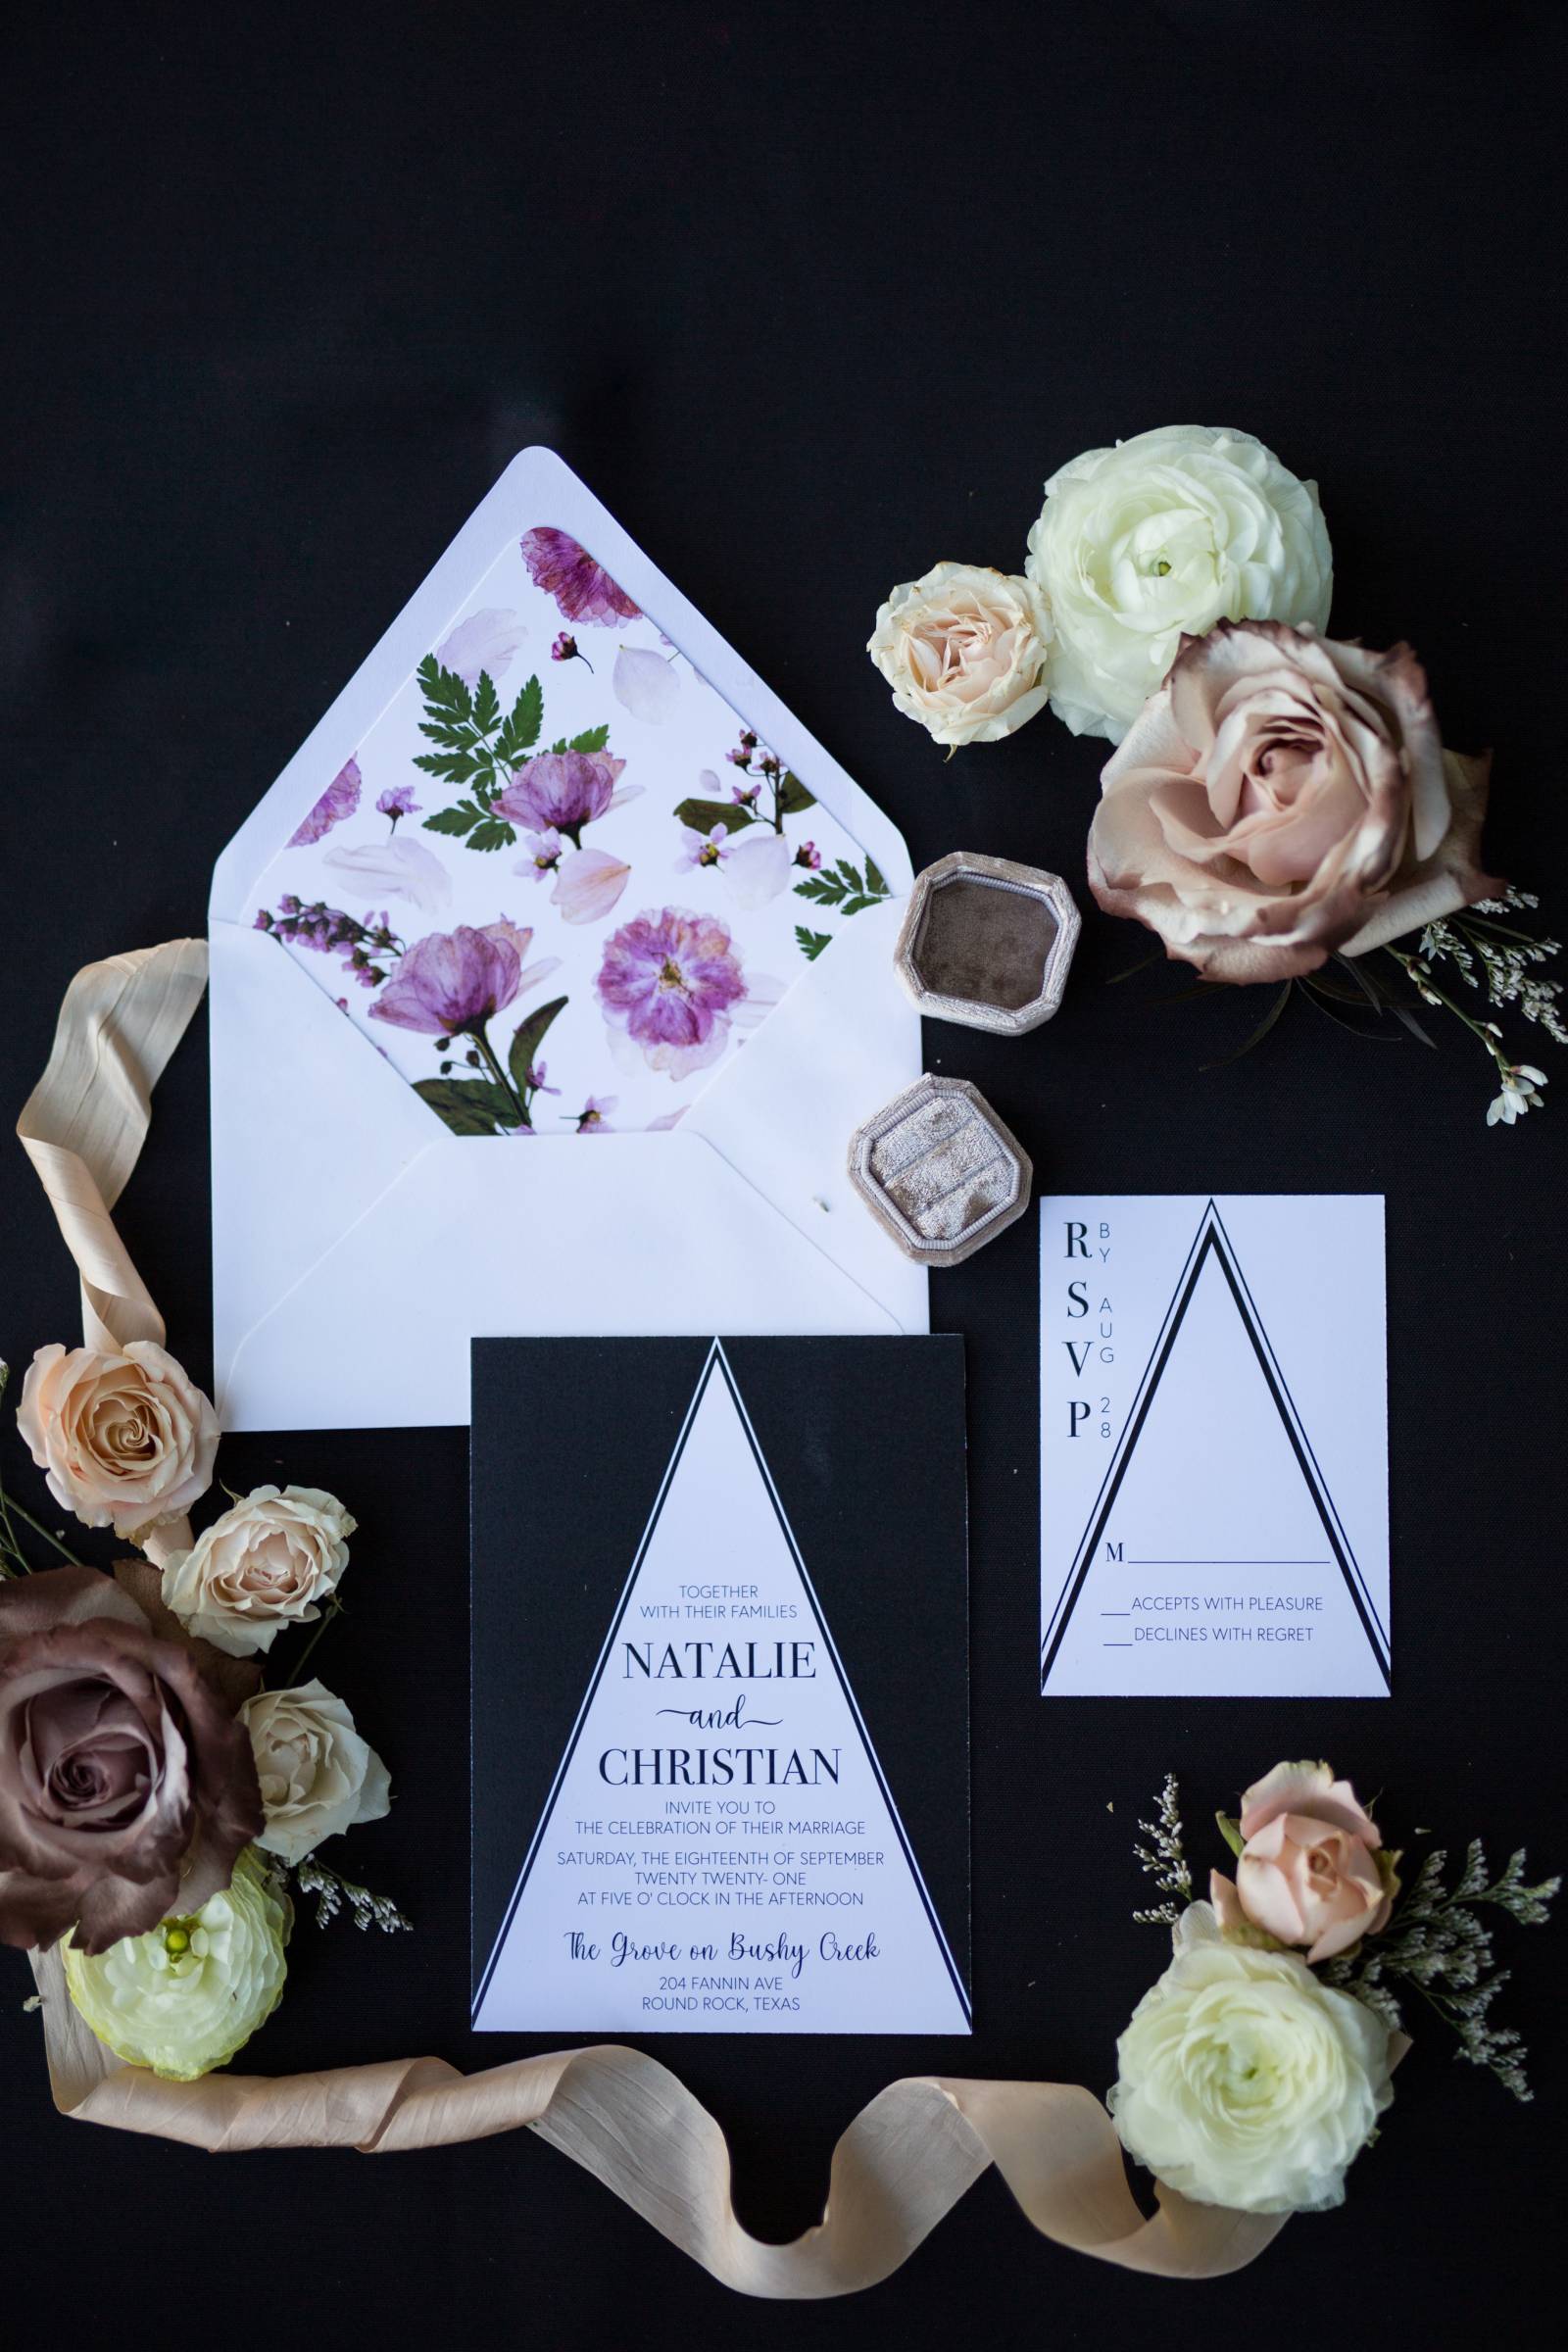 Black stationery with pink floral